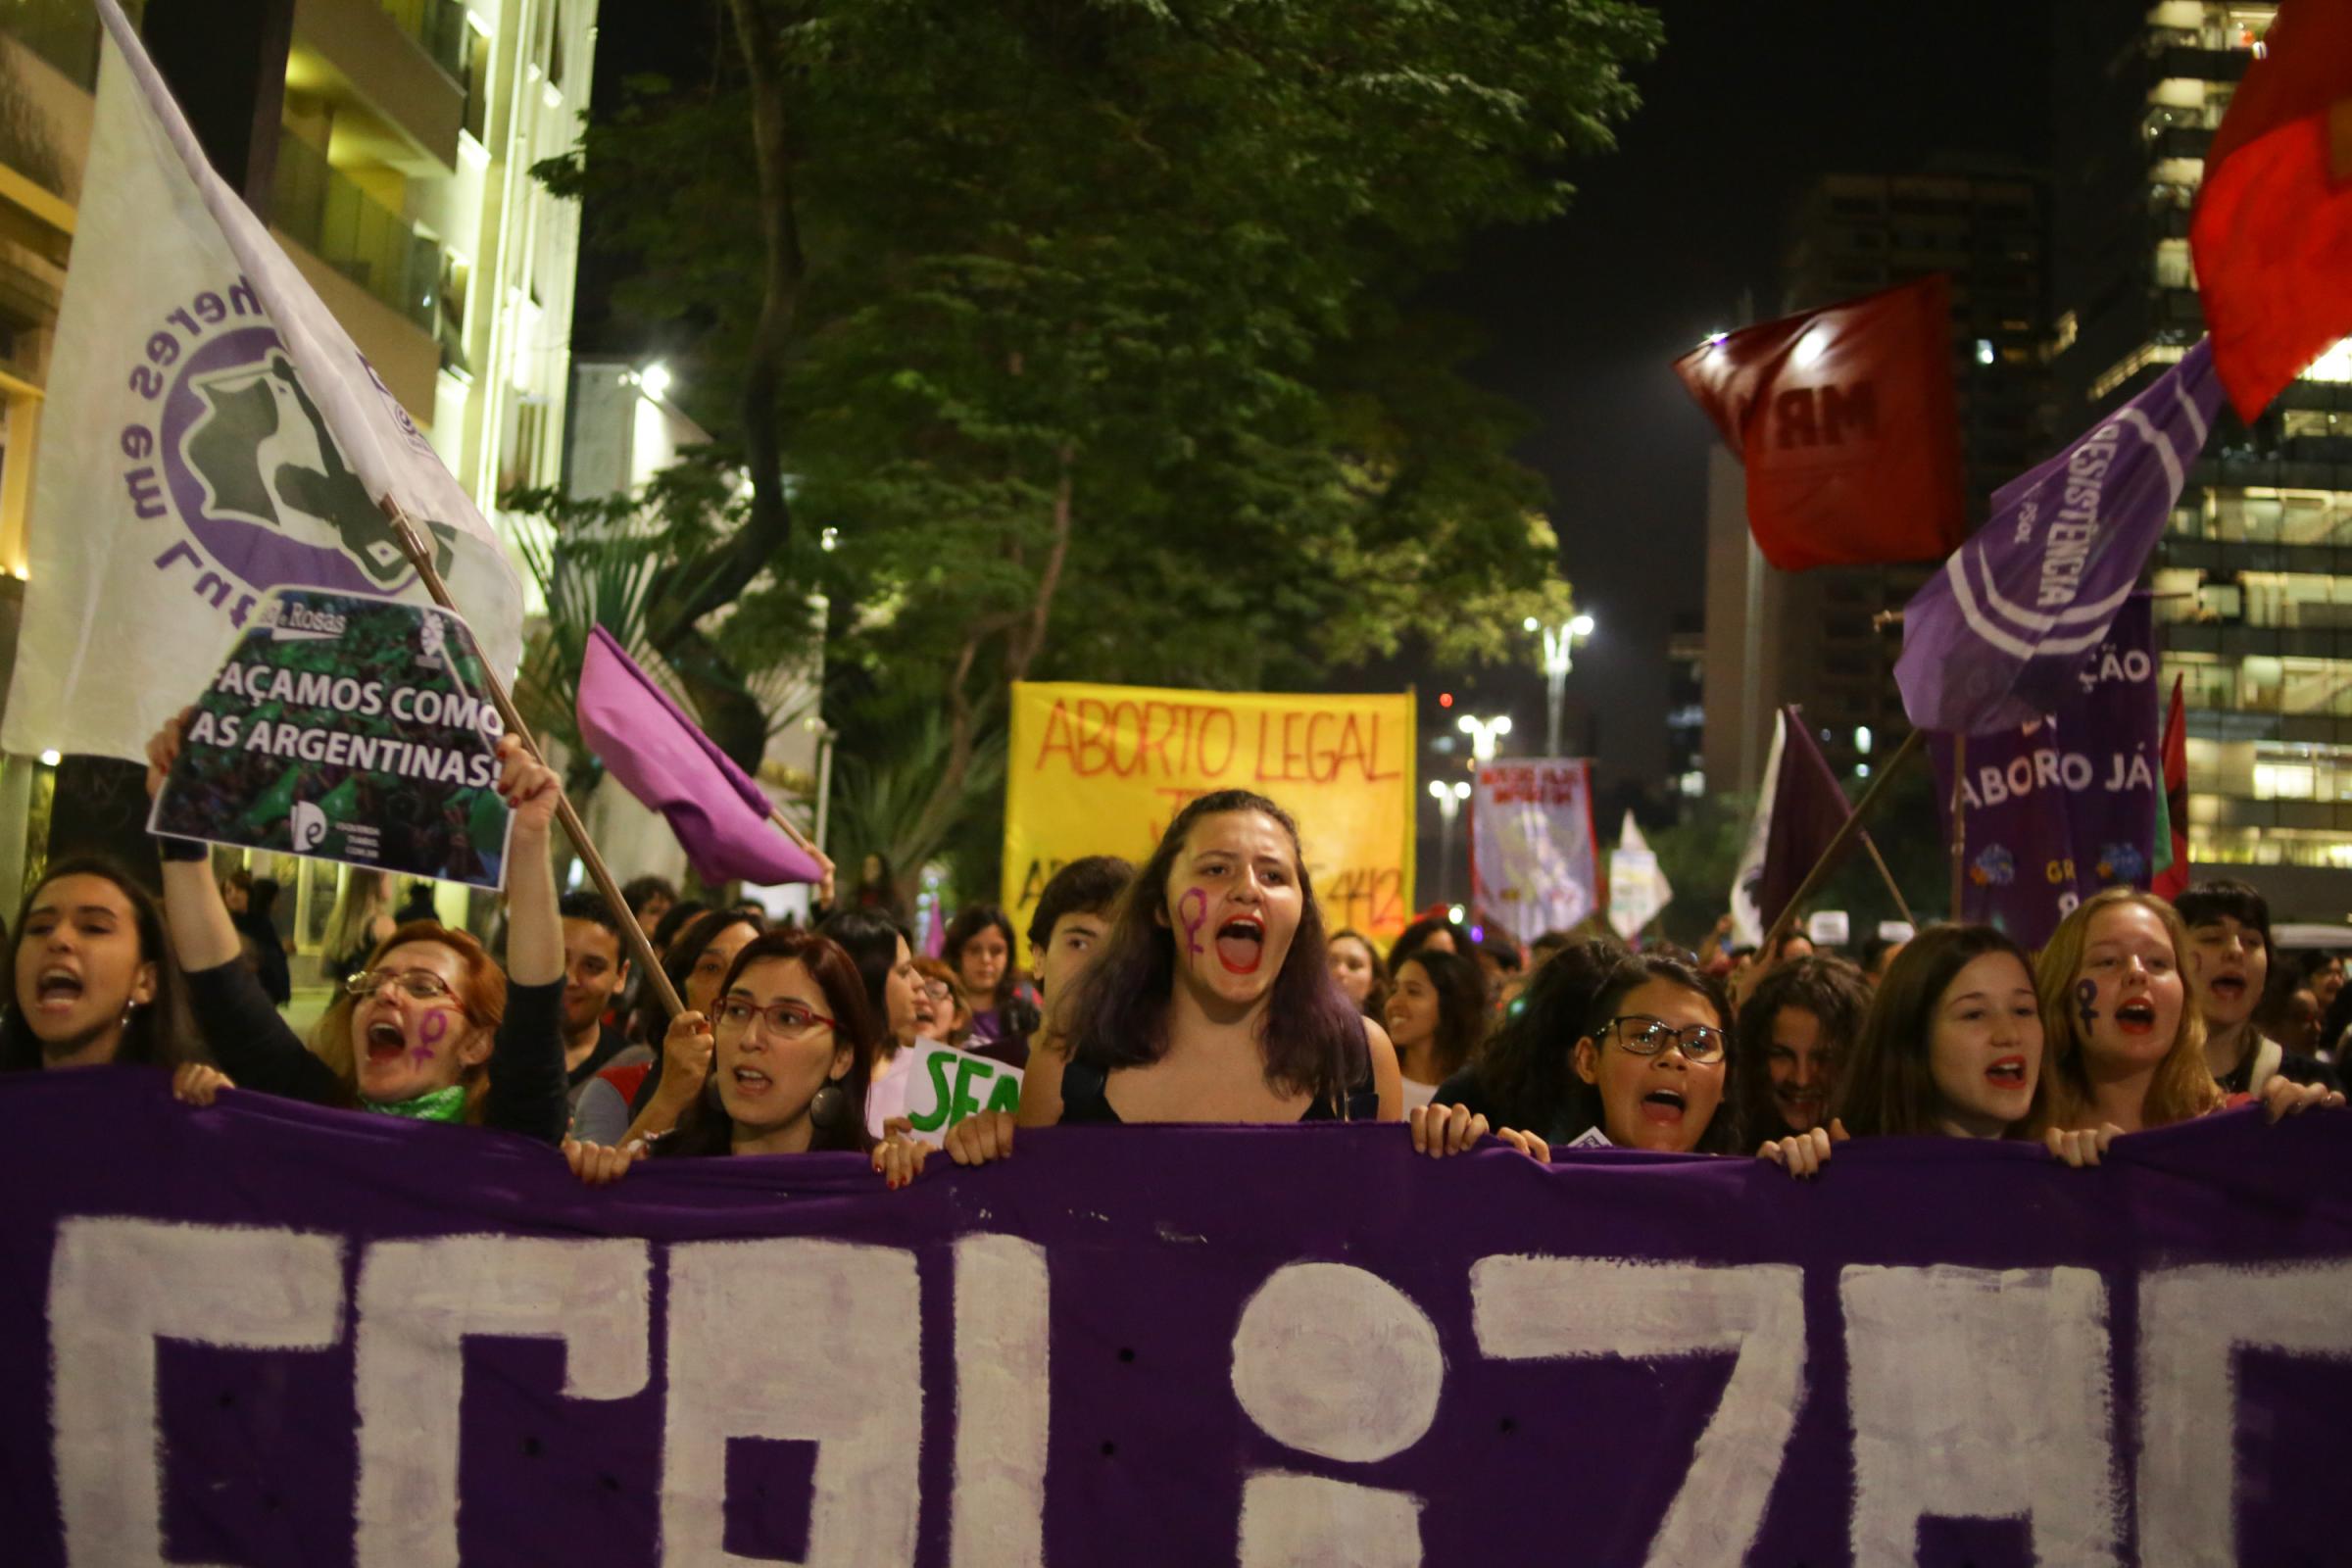 Protest For Legalization Of Abortion In Sao Paulo